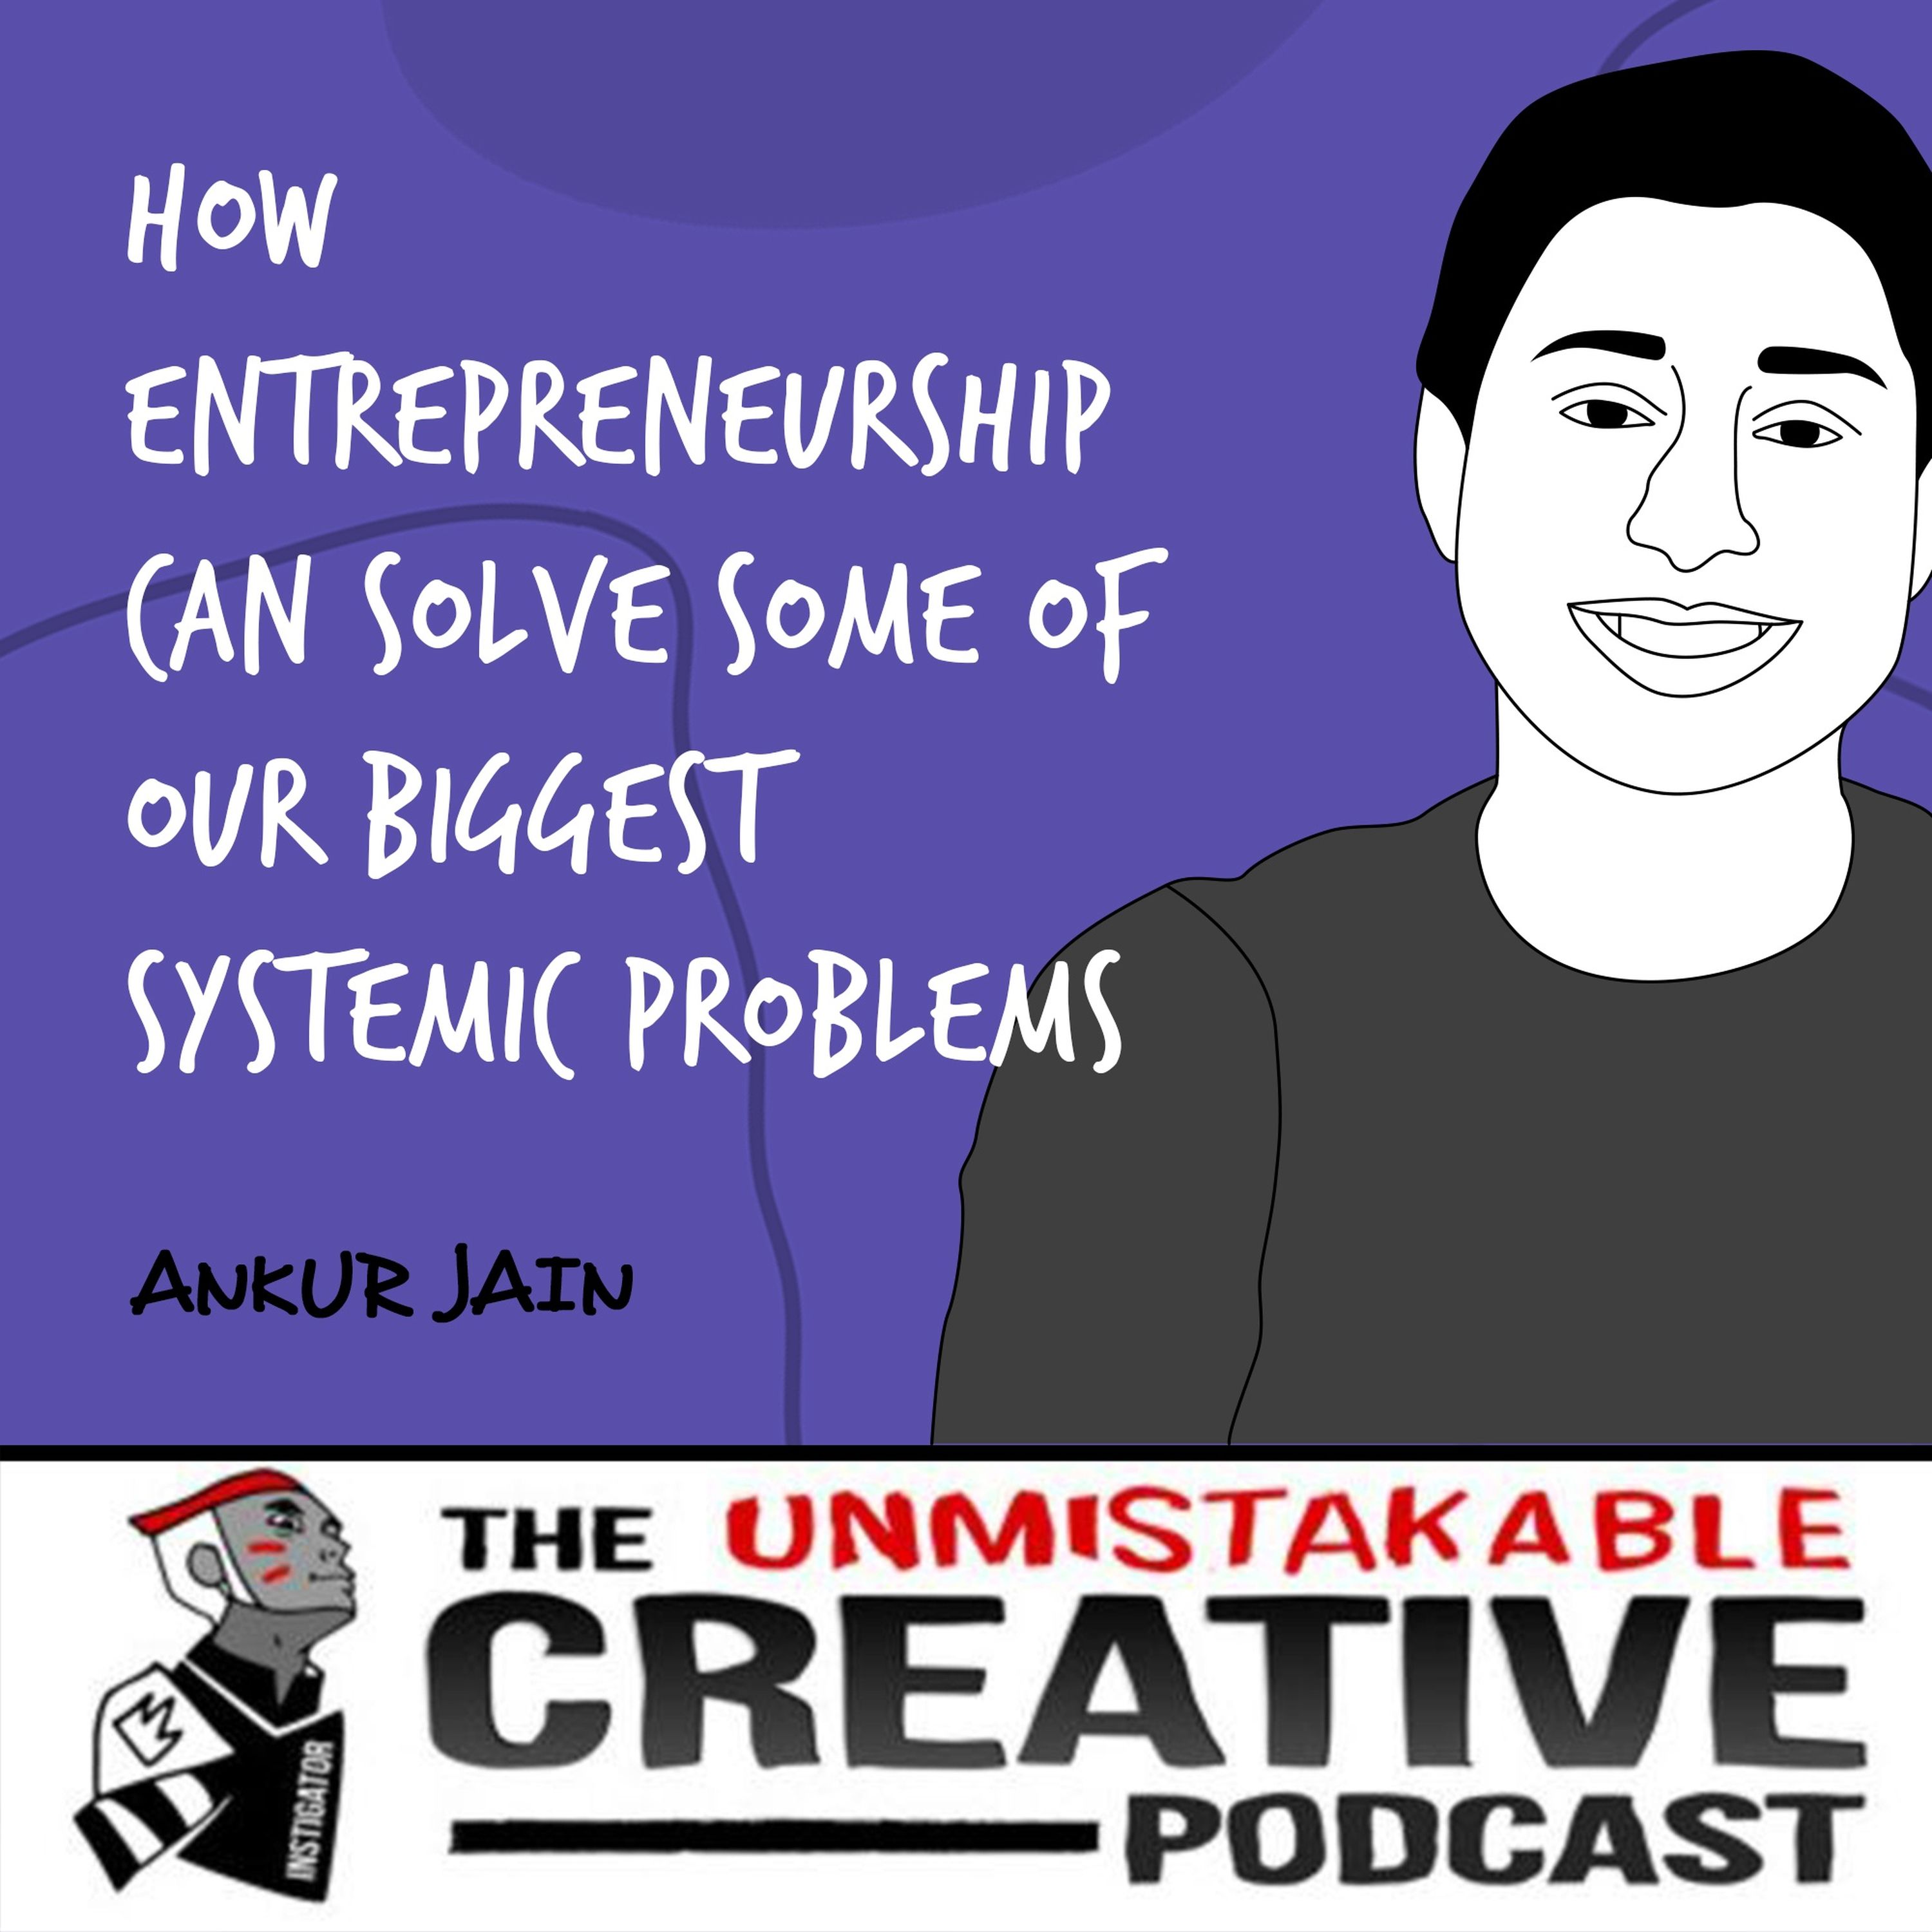 Ankur Jain | How Entrepreneurship Can Solve Some Of Our Biggest Systemic Problems